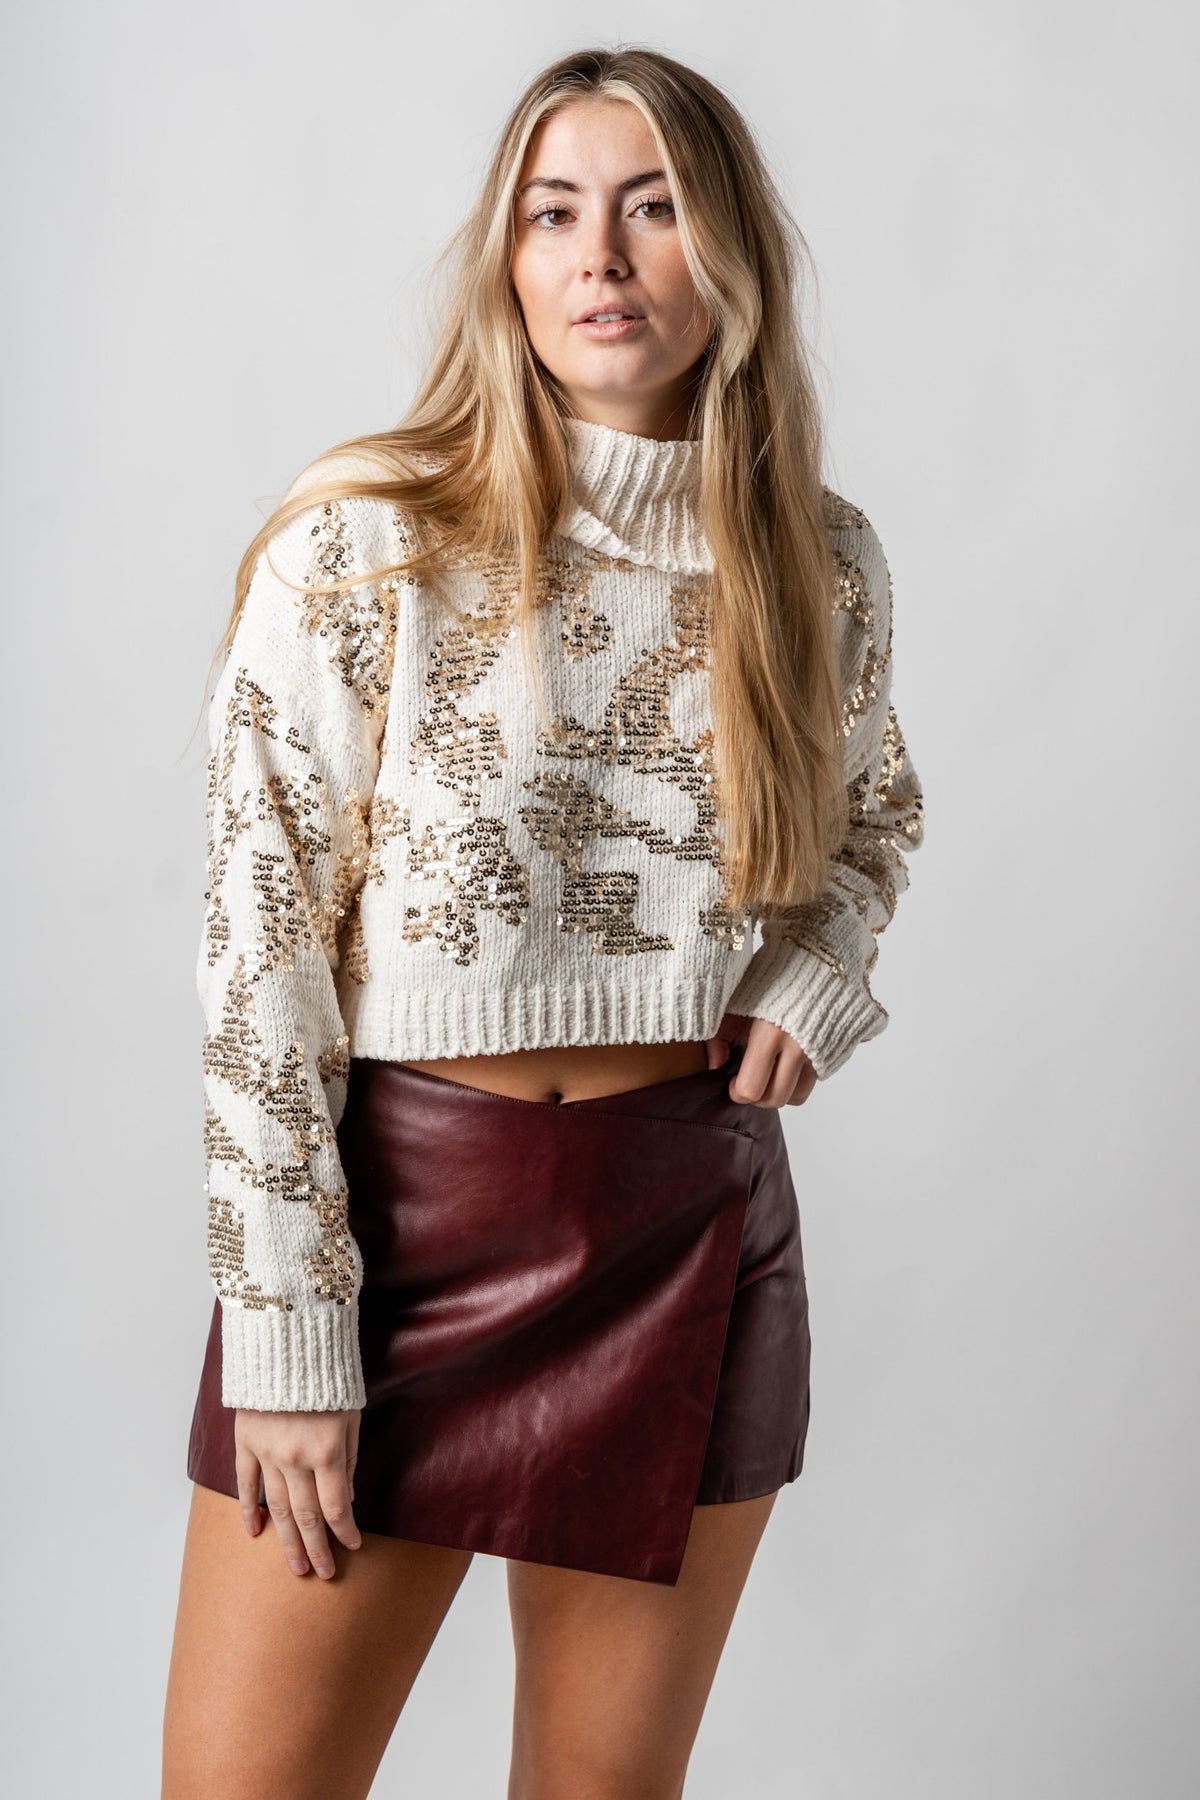 Sequin turtleneck crop sweater cream/gold - Trendy Holiday Apparel at Lush Fashion Lounge Boutique in Oklahoma City